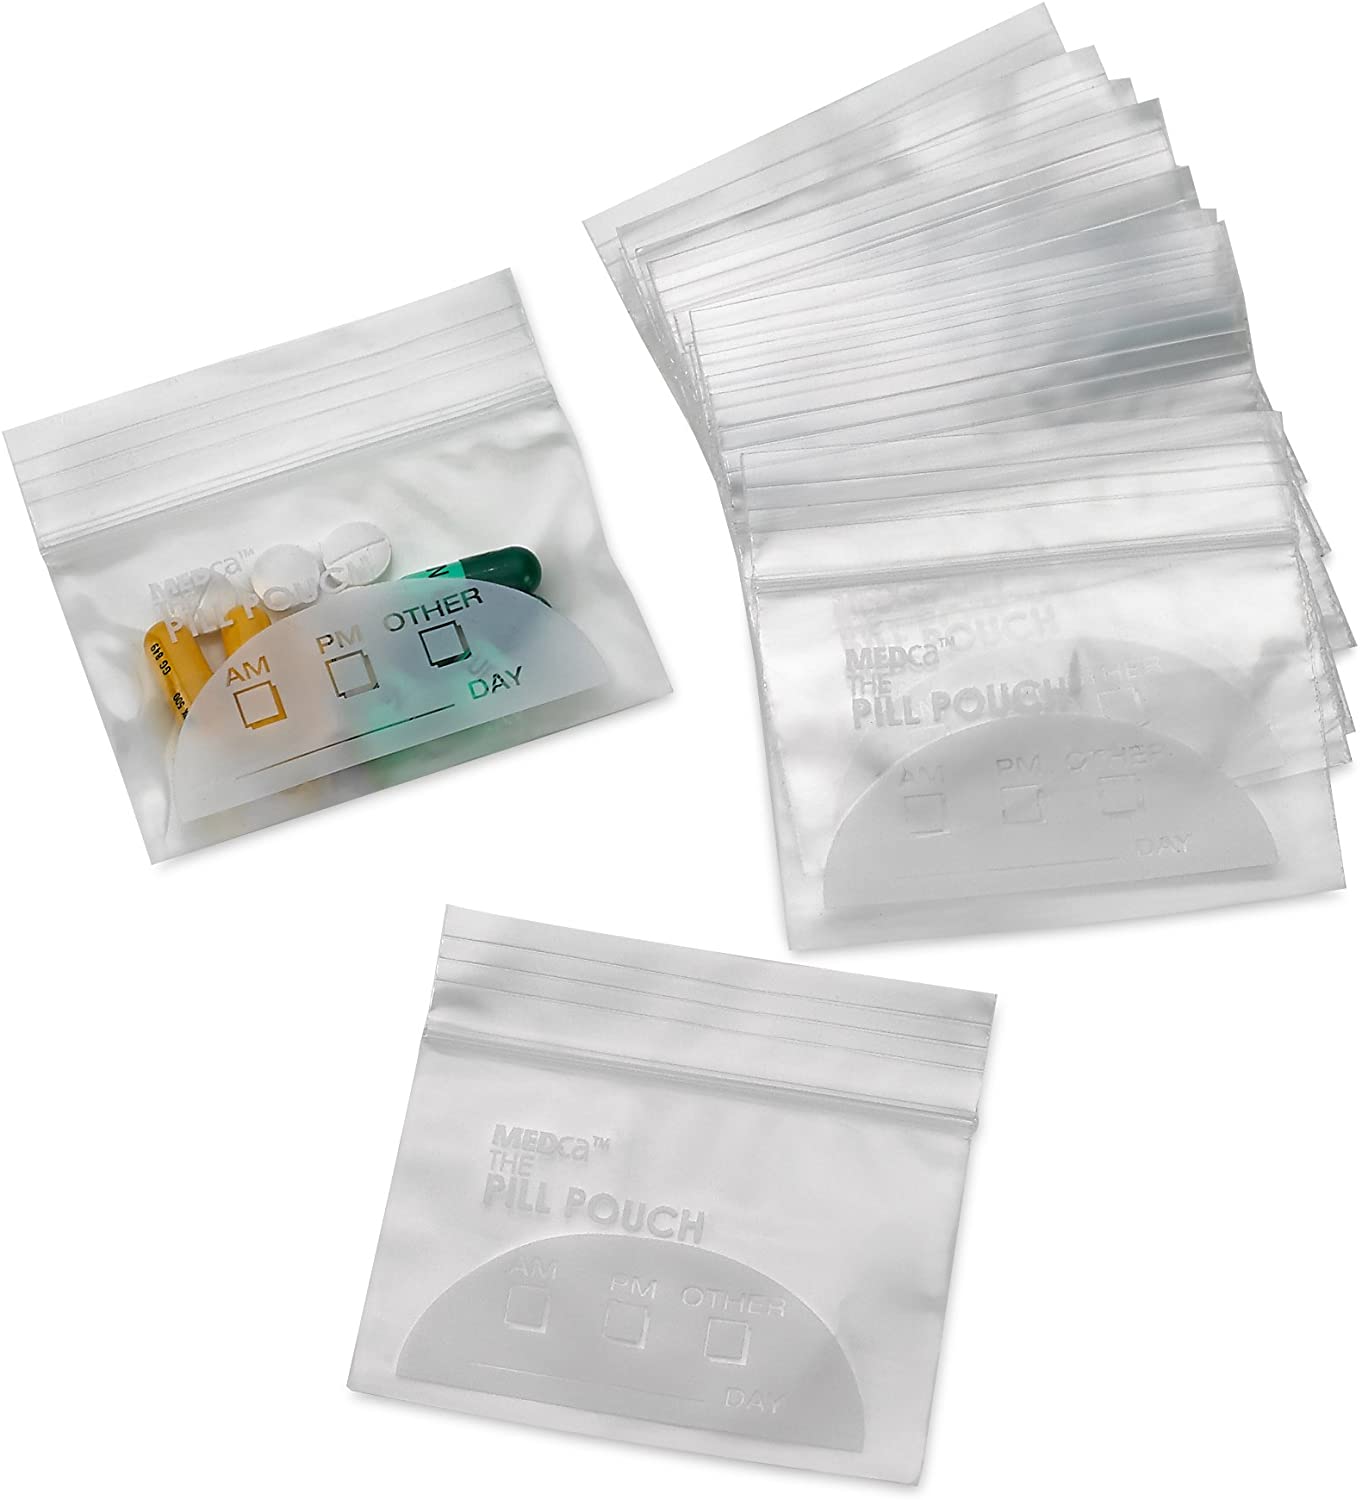 Plastic Pill Travel Organizer Bags With Write-On Labels - 100 Ct